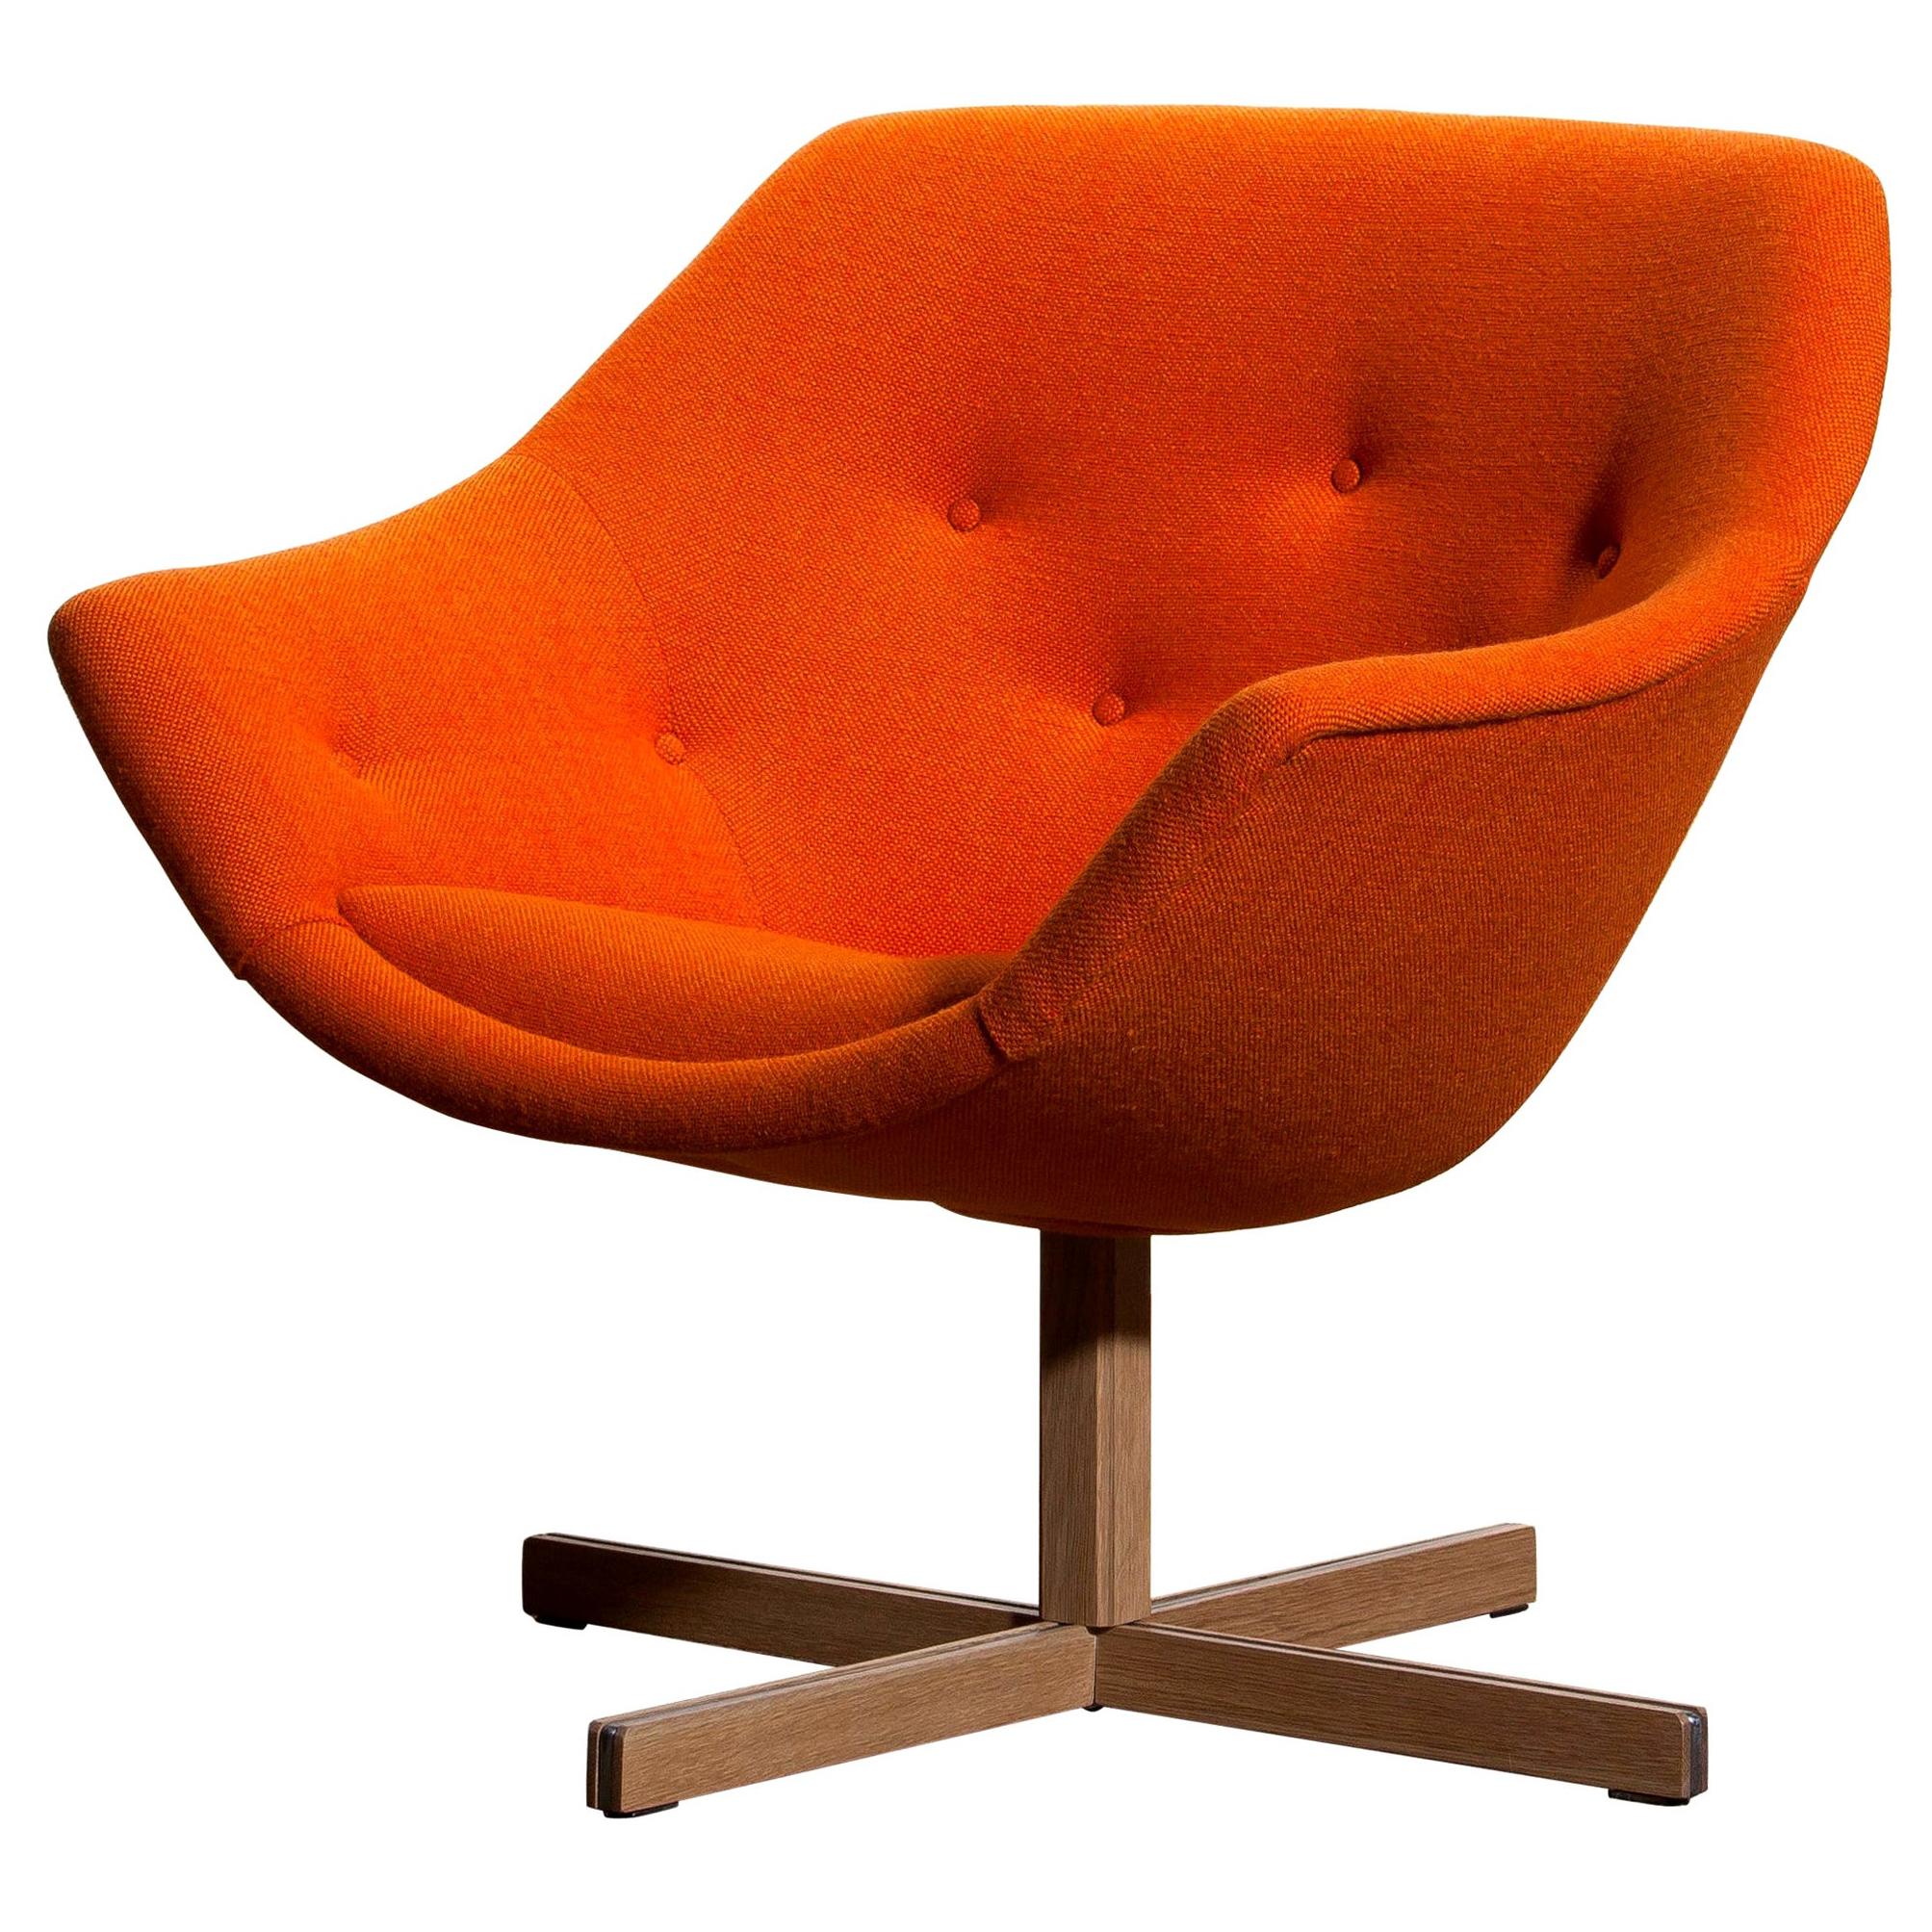 Fantastic 'Mandarini' swivel armchair made by Carl Gustaf Hiort for Puunveisto Oy, wood work Ltd. This chair is upholstered with a buttoned orange fabric 'Hallingdal' by Kvadrat designed by Nanna Ditzel, on an oak swivel base.
It is in perfect and